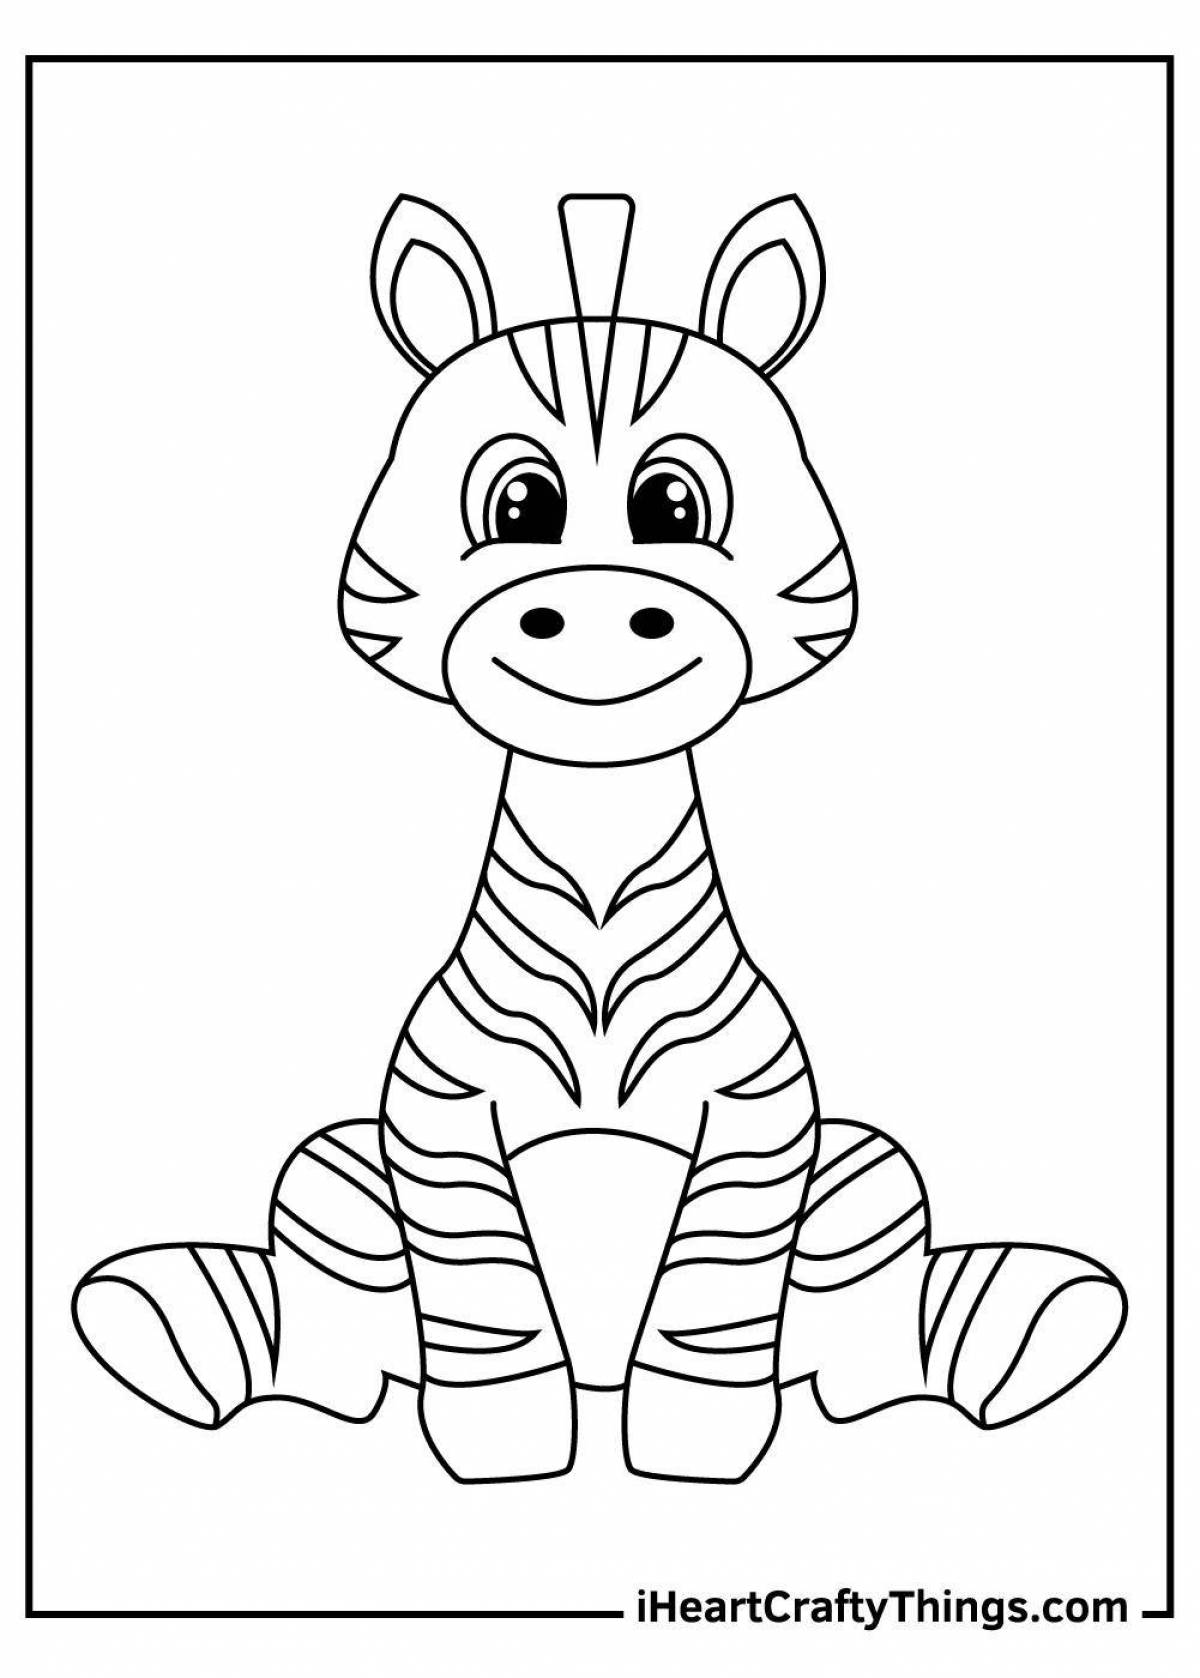 Incredible zebra coloring book for kids 3-4 years old